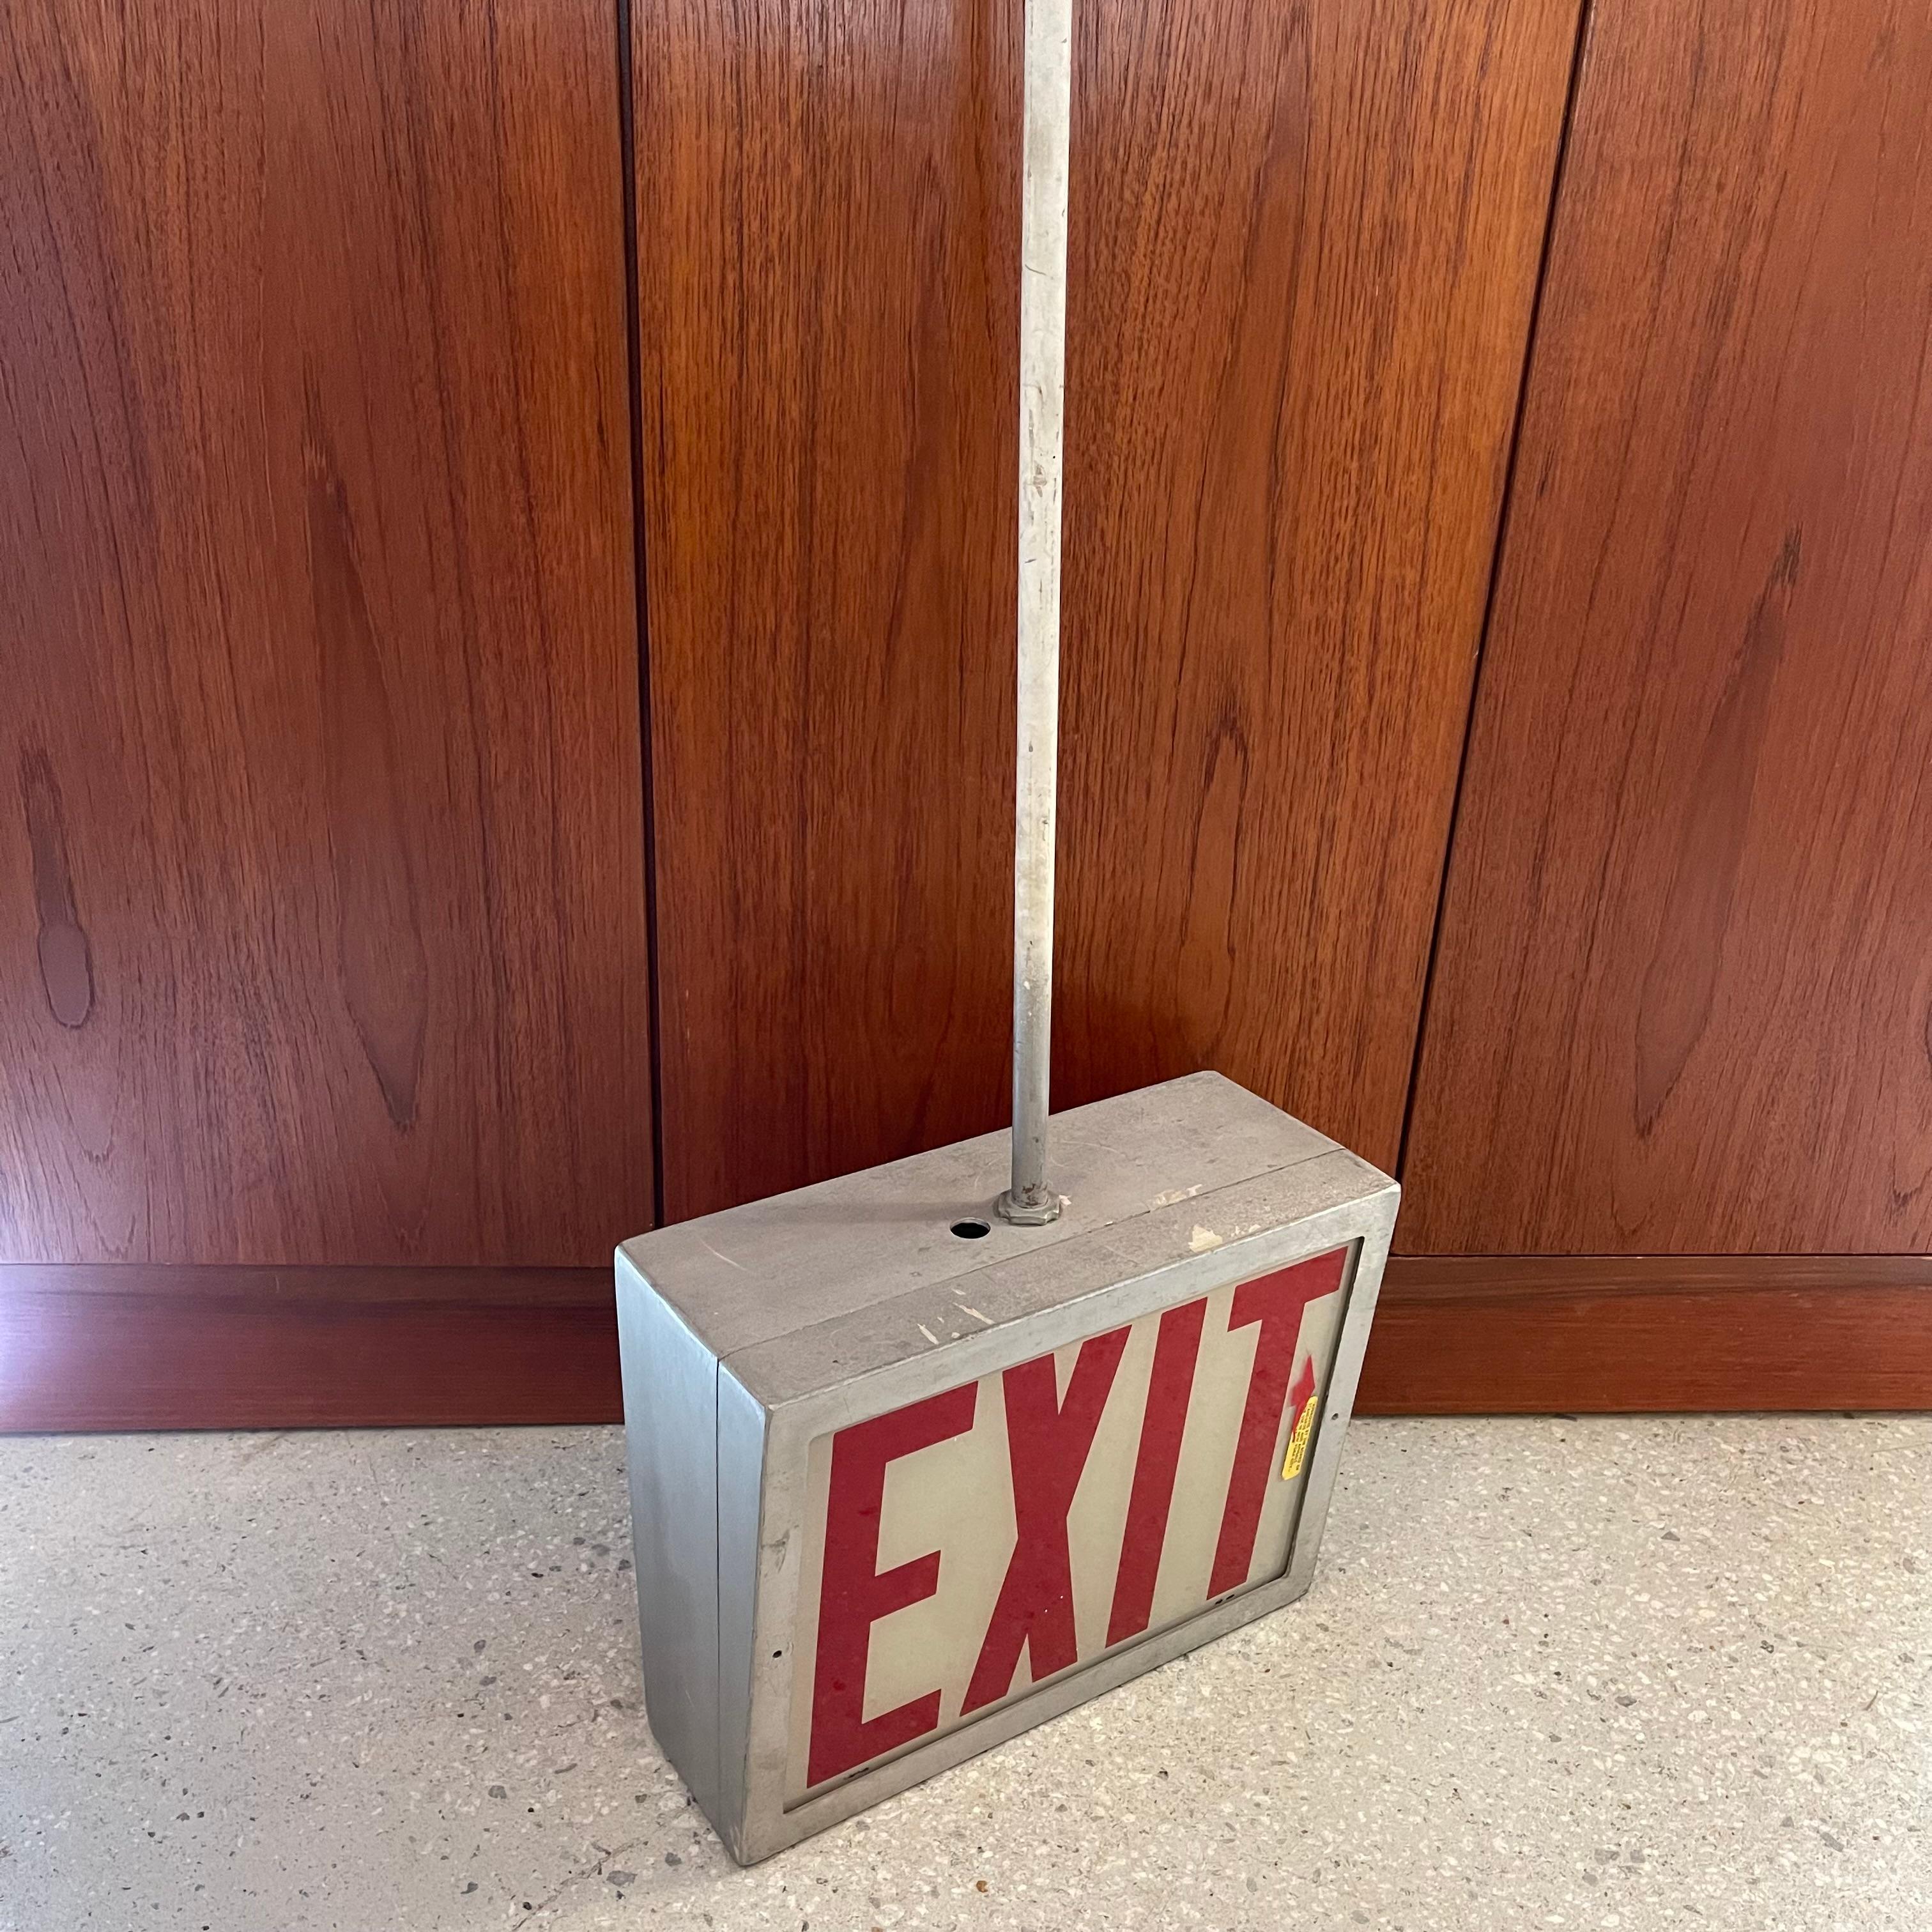 American Double Sided Exit Sign Pendant Light on Pole